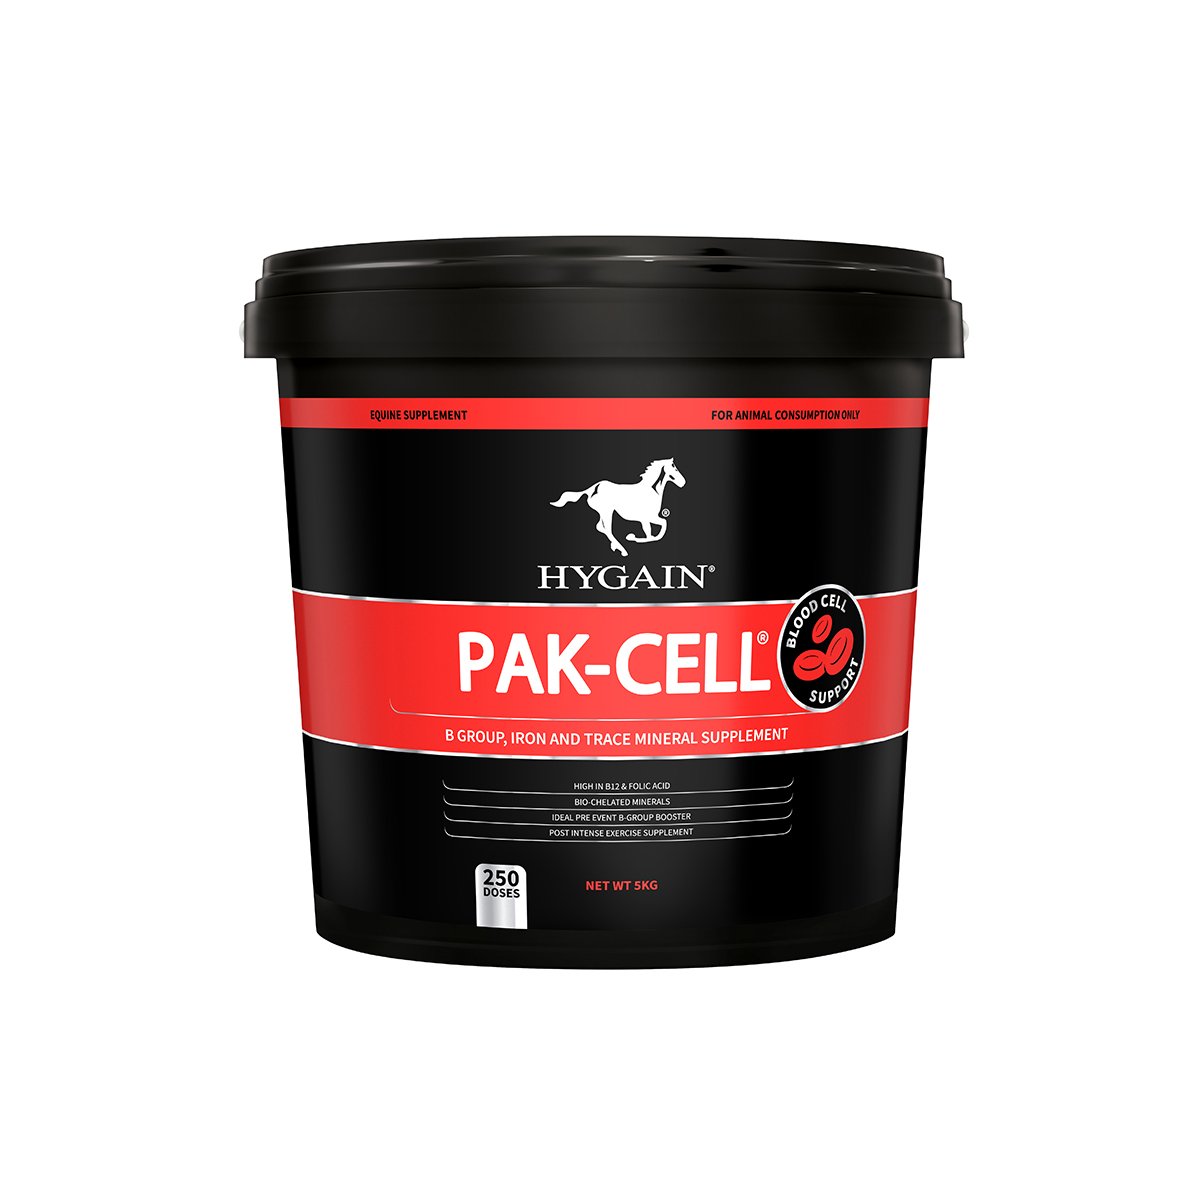 Hygain Pak Cell 5kg - Animalcare Supplies